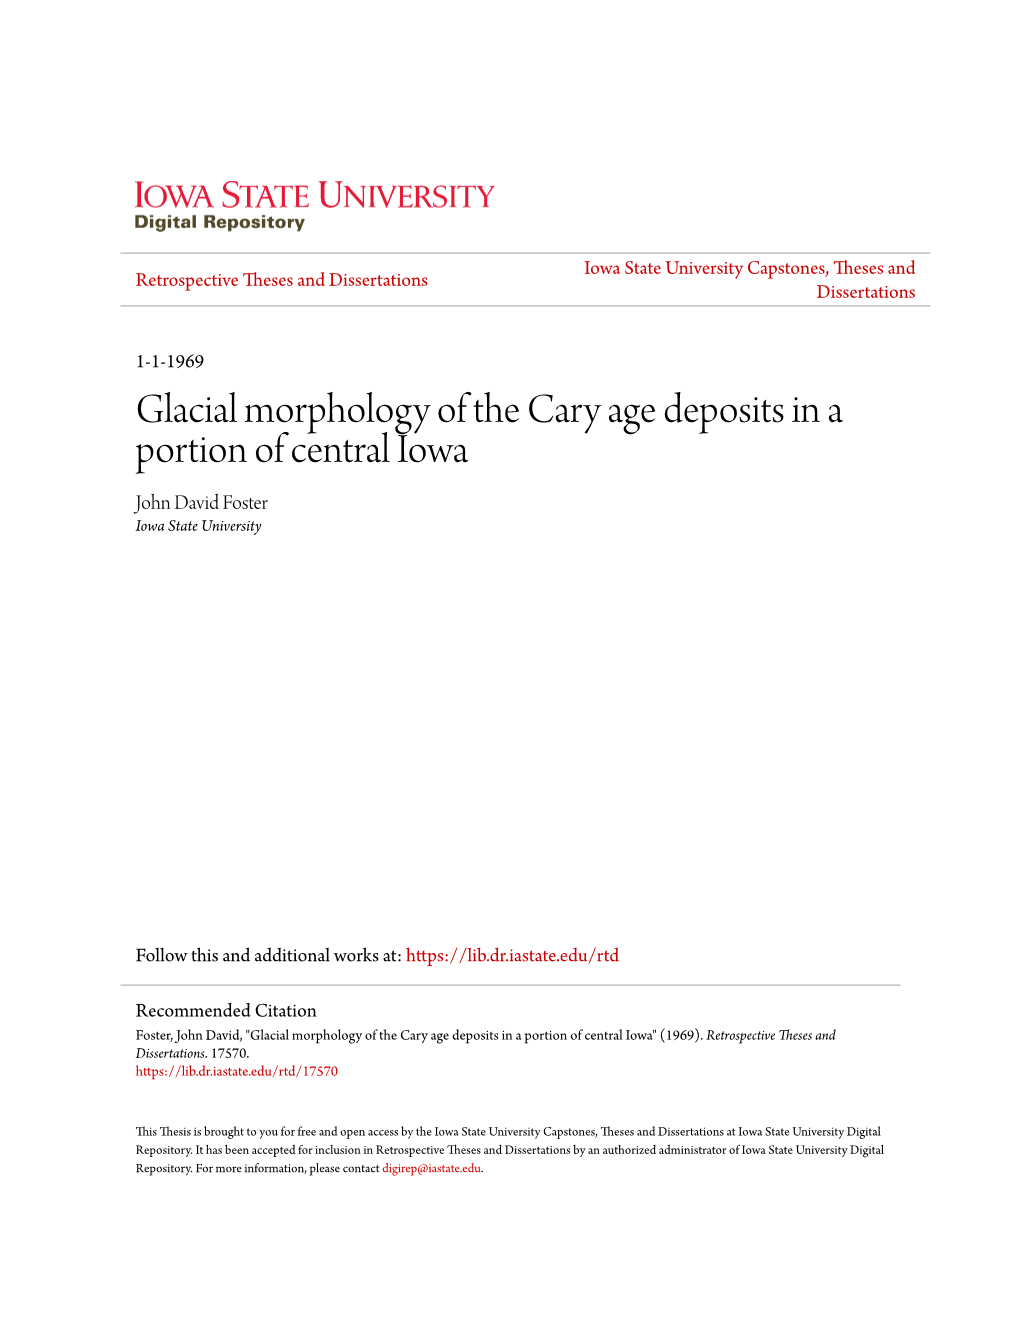 Glacial Morphology of the Cary Age Deposits in a Portion of Central Iowa John David Foster Iowa State University